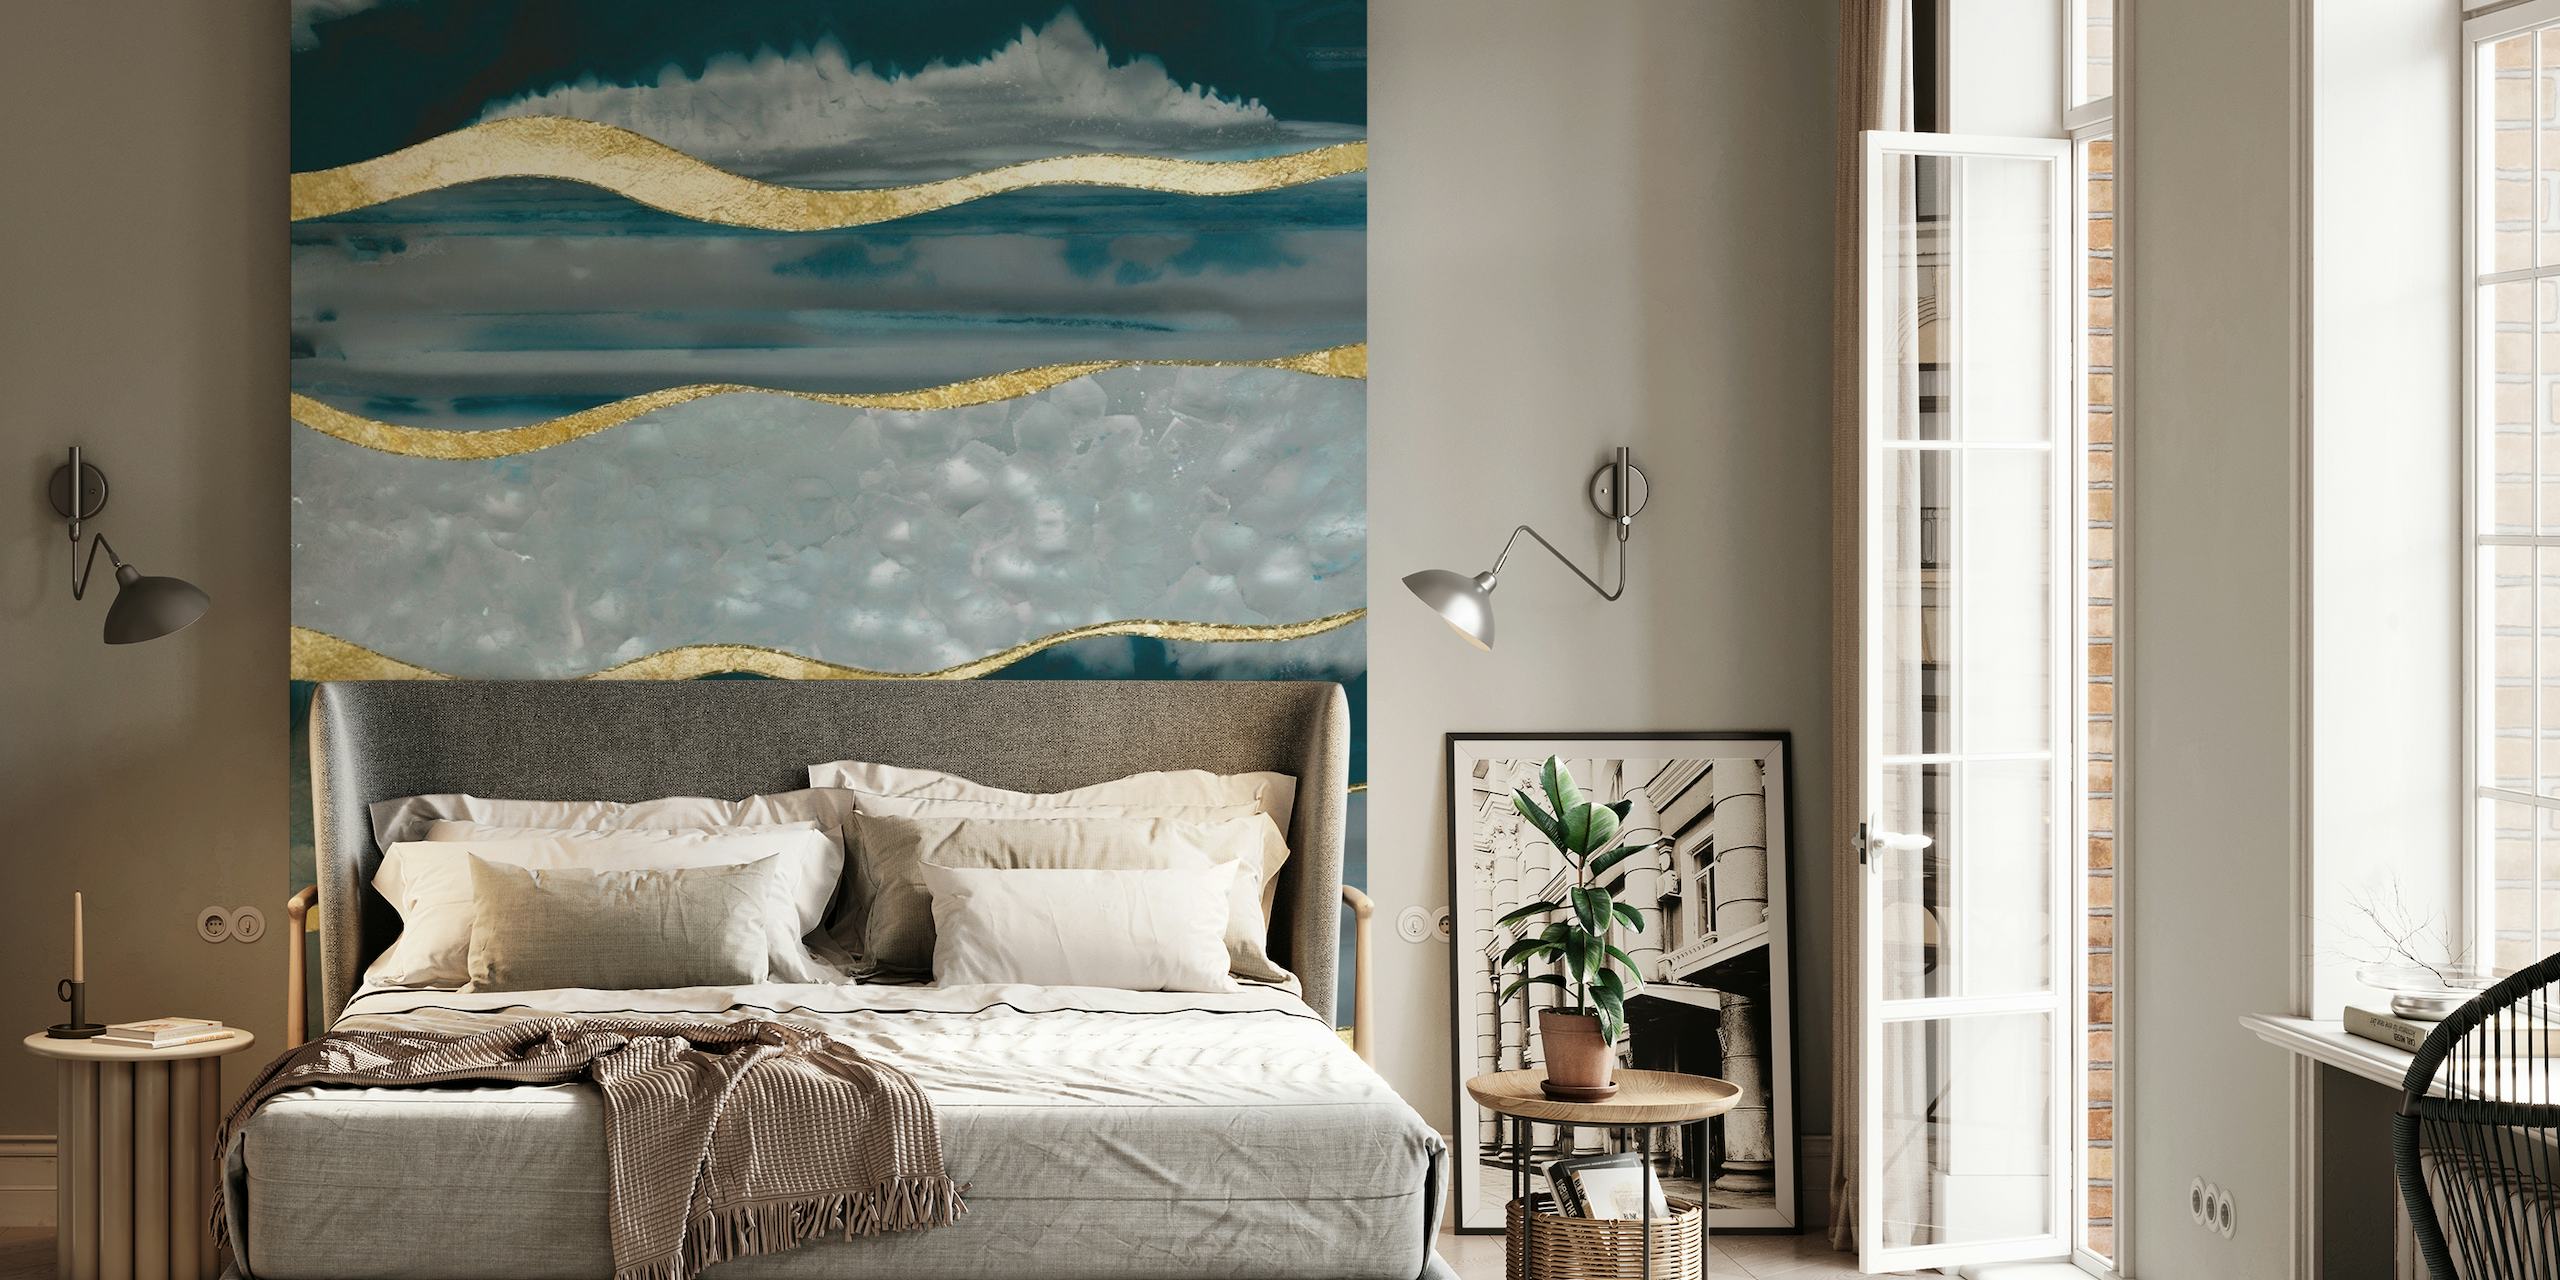 Teal and gold agate-inspired wall mural with luxurious stripes.